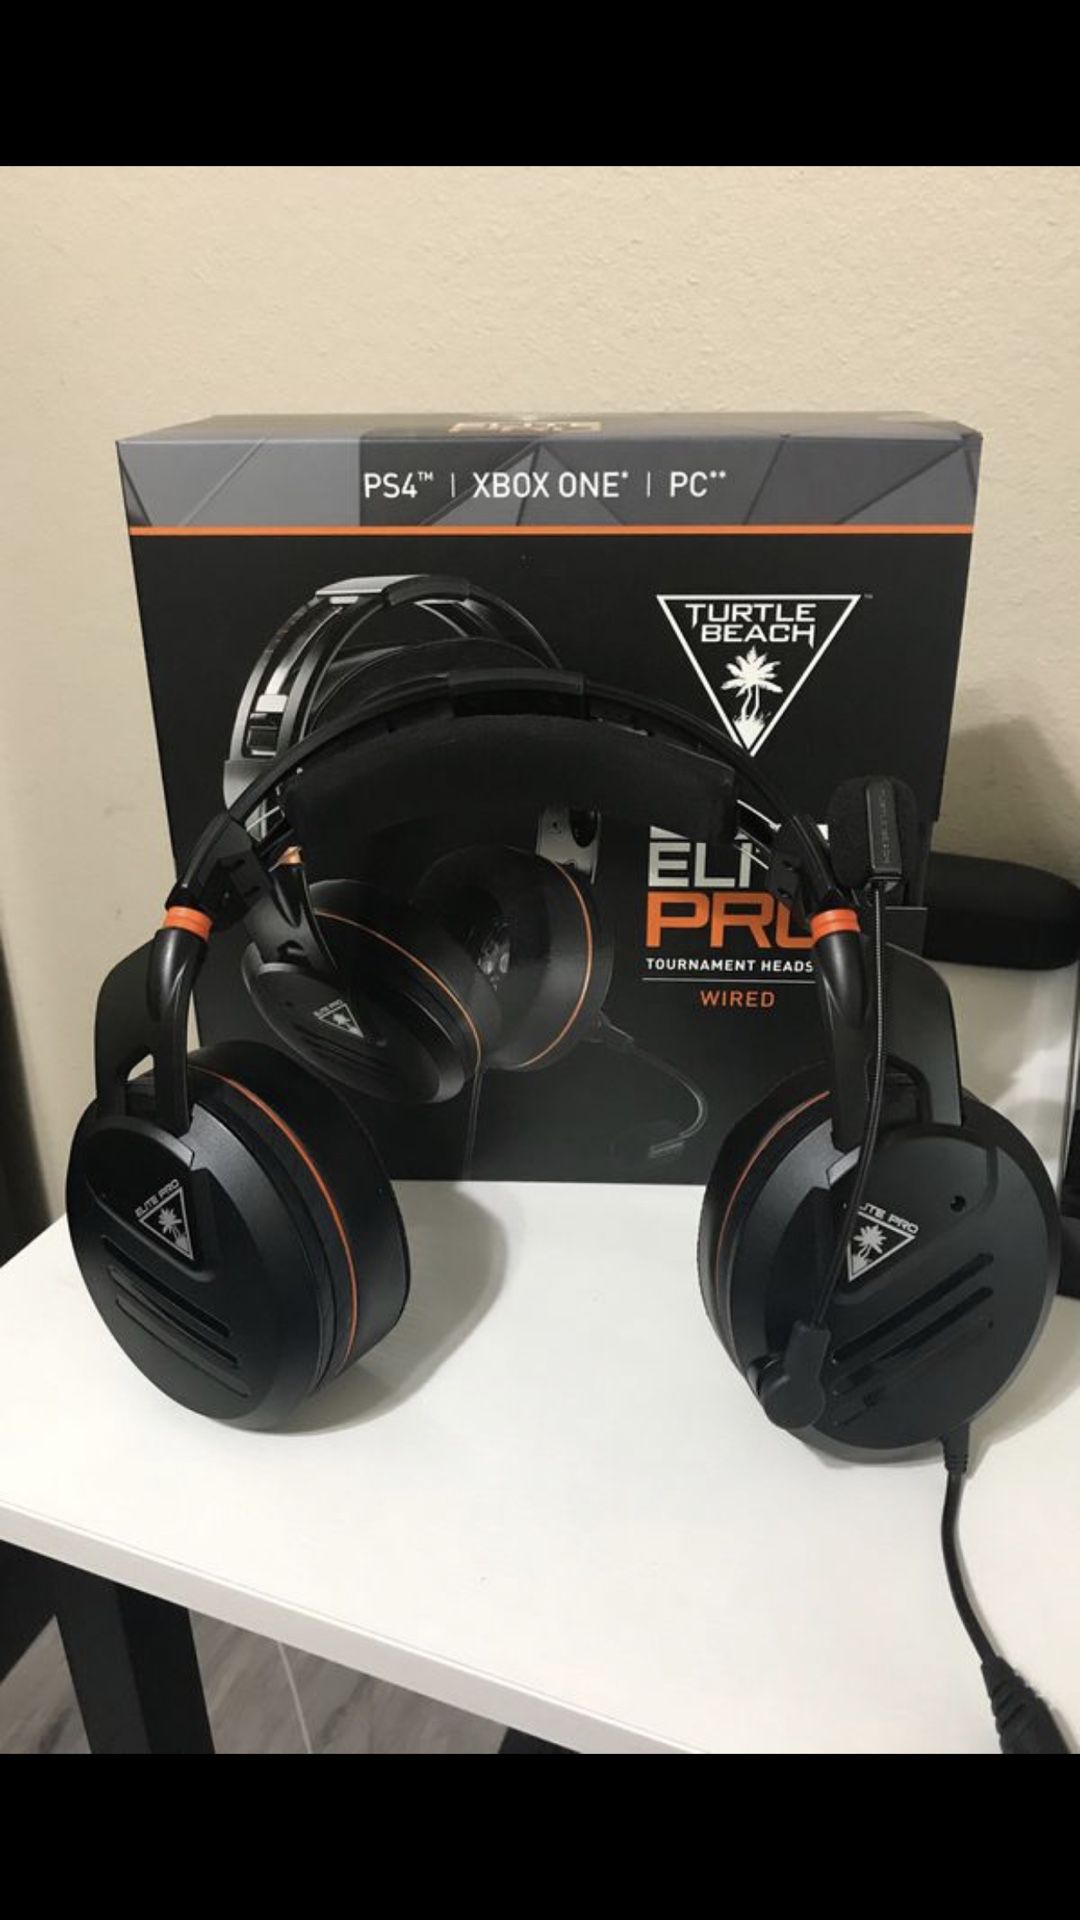 Turtle Beach Elite Pro Headset, Used barely, In good condition. PAYPAL or Zelle transfer ONLY.